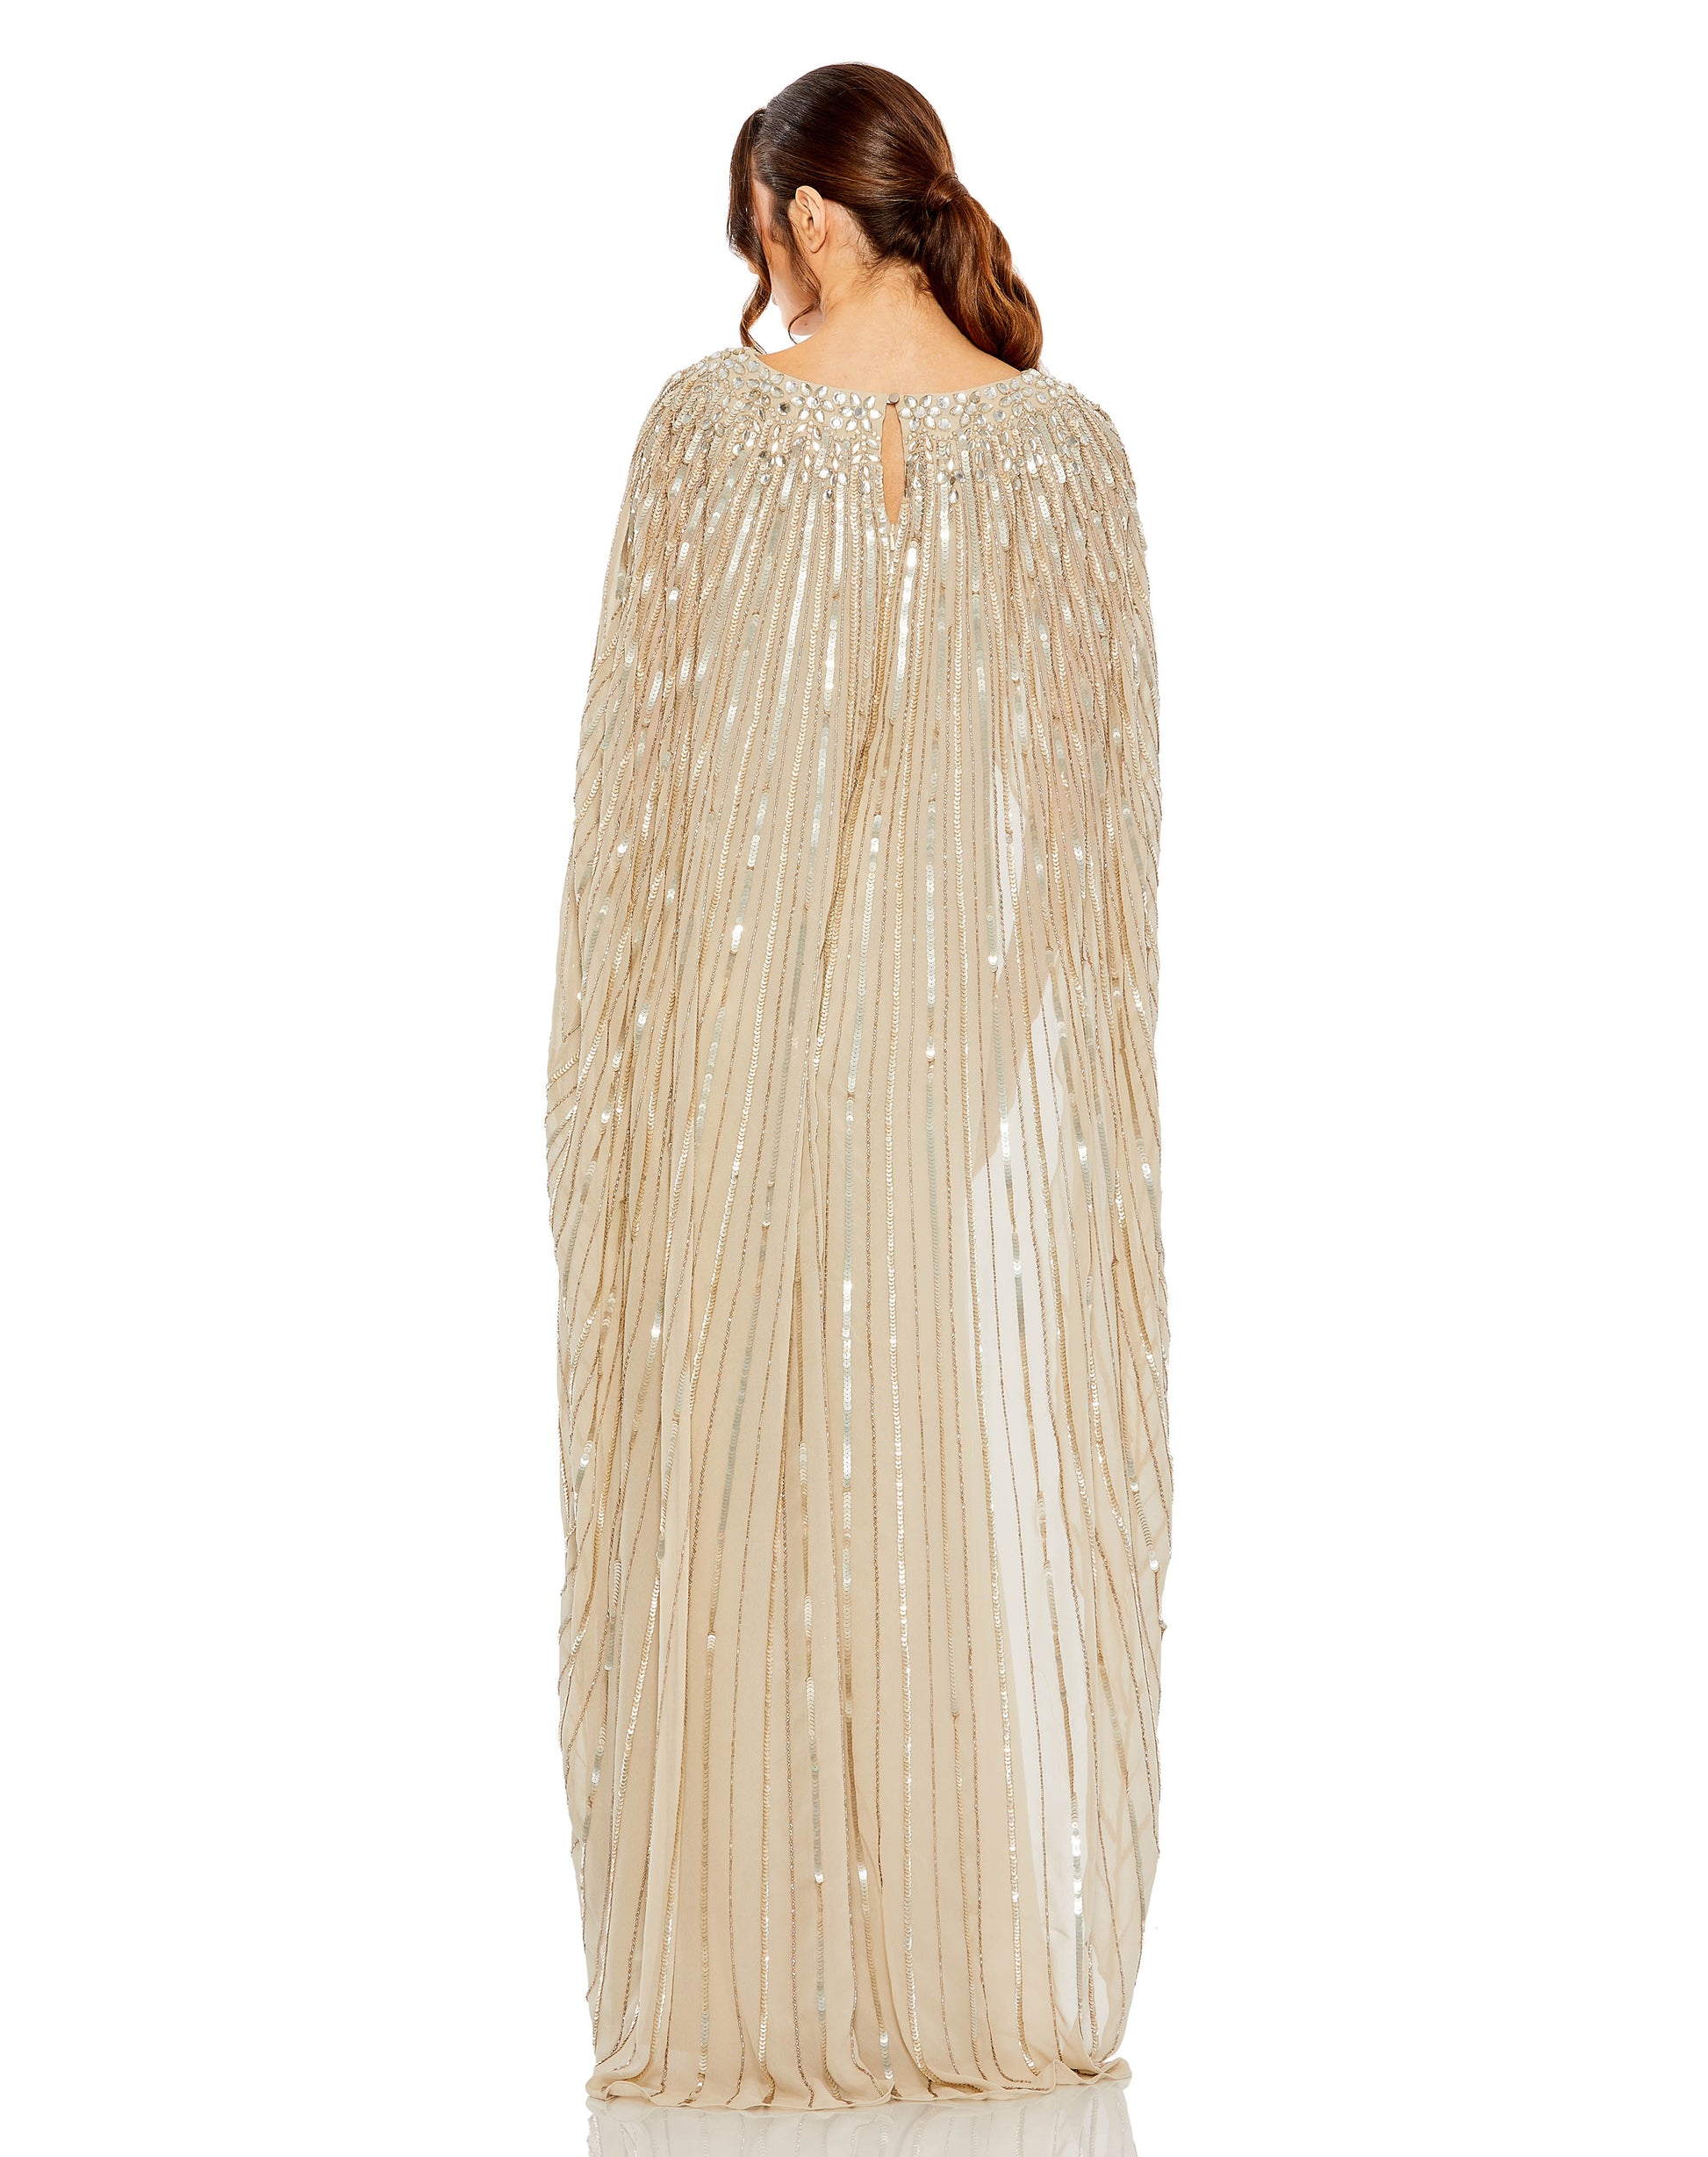 Mac Duggal Embellished mesh overlay fabric; 100% polyester lining Fully lined through bodice and skirt; sheer unlined cape overlay Boat neckline Cape sleeves Asymmetrical cape overlay Sweeping train Concealed back zipper Approx. 62.5" from top of shoulder